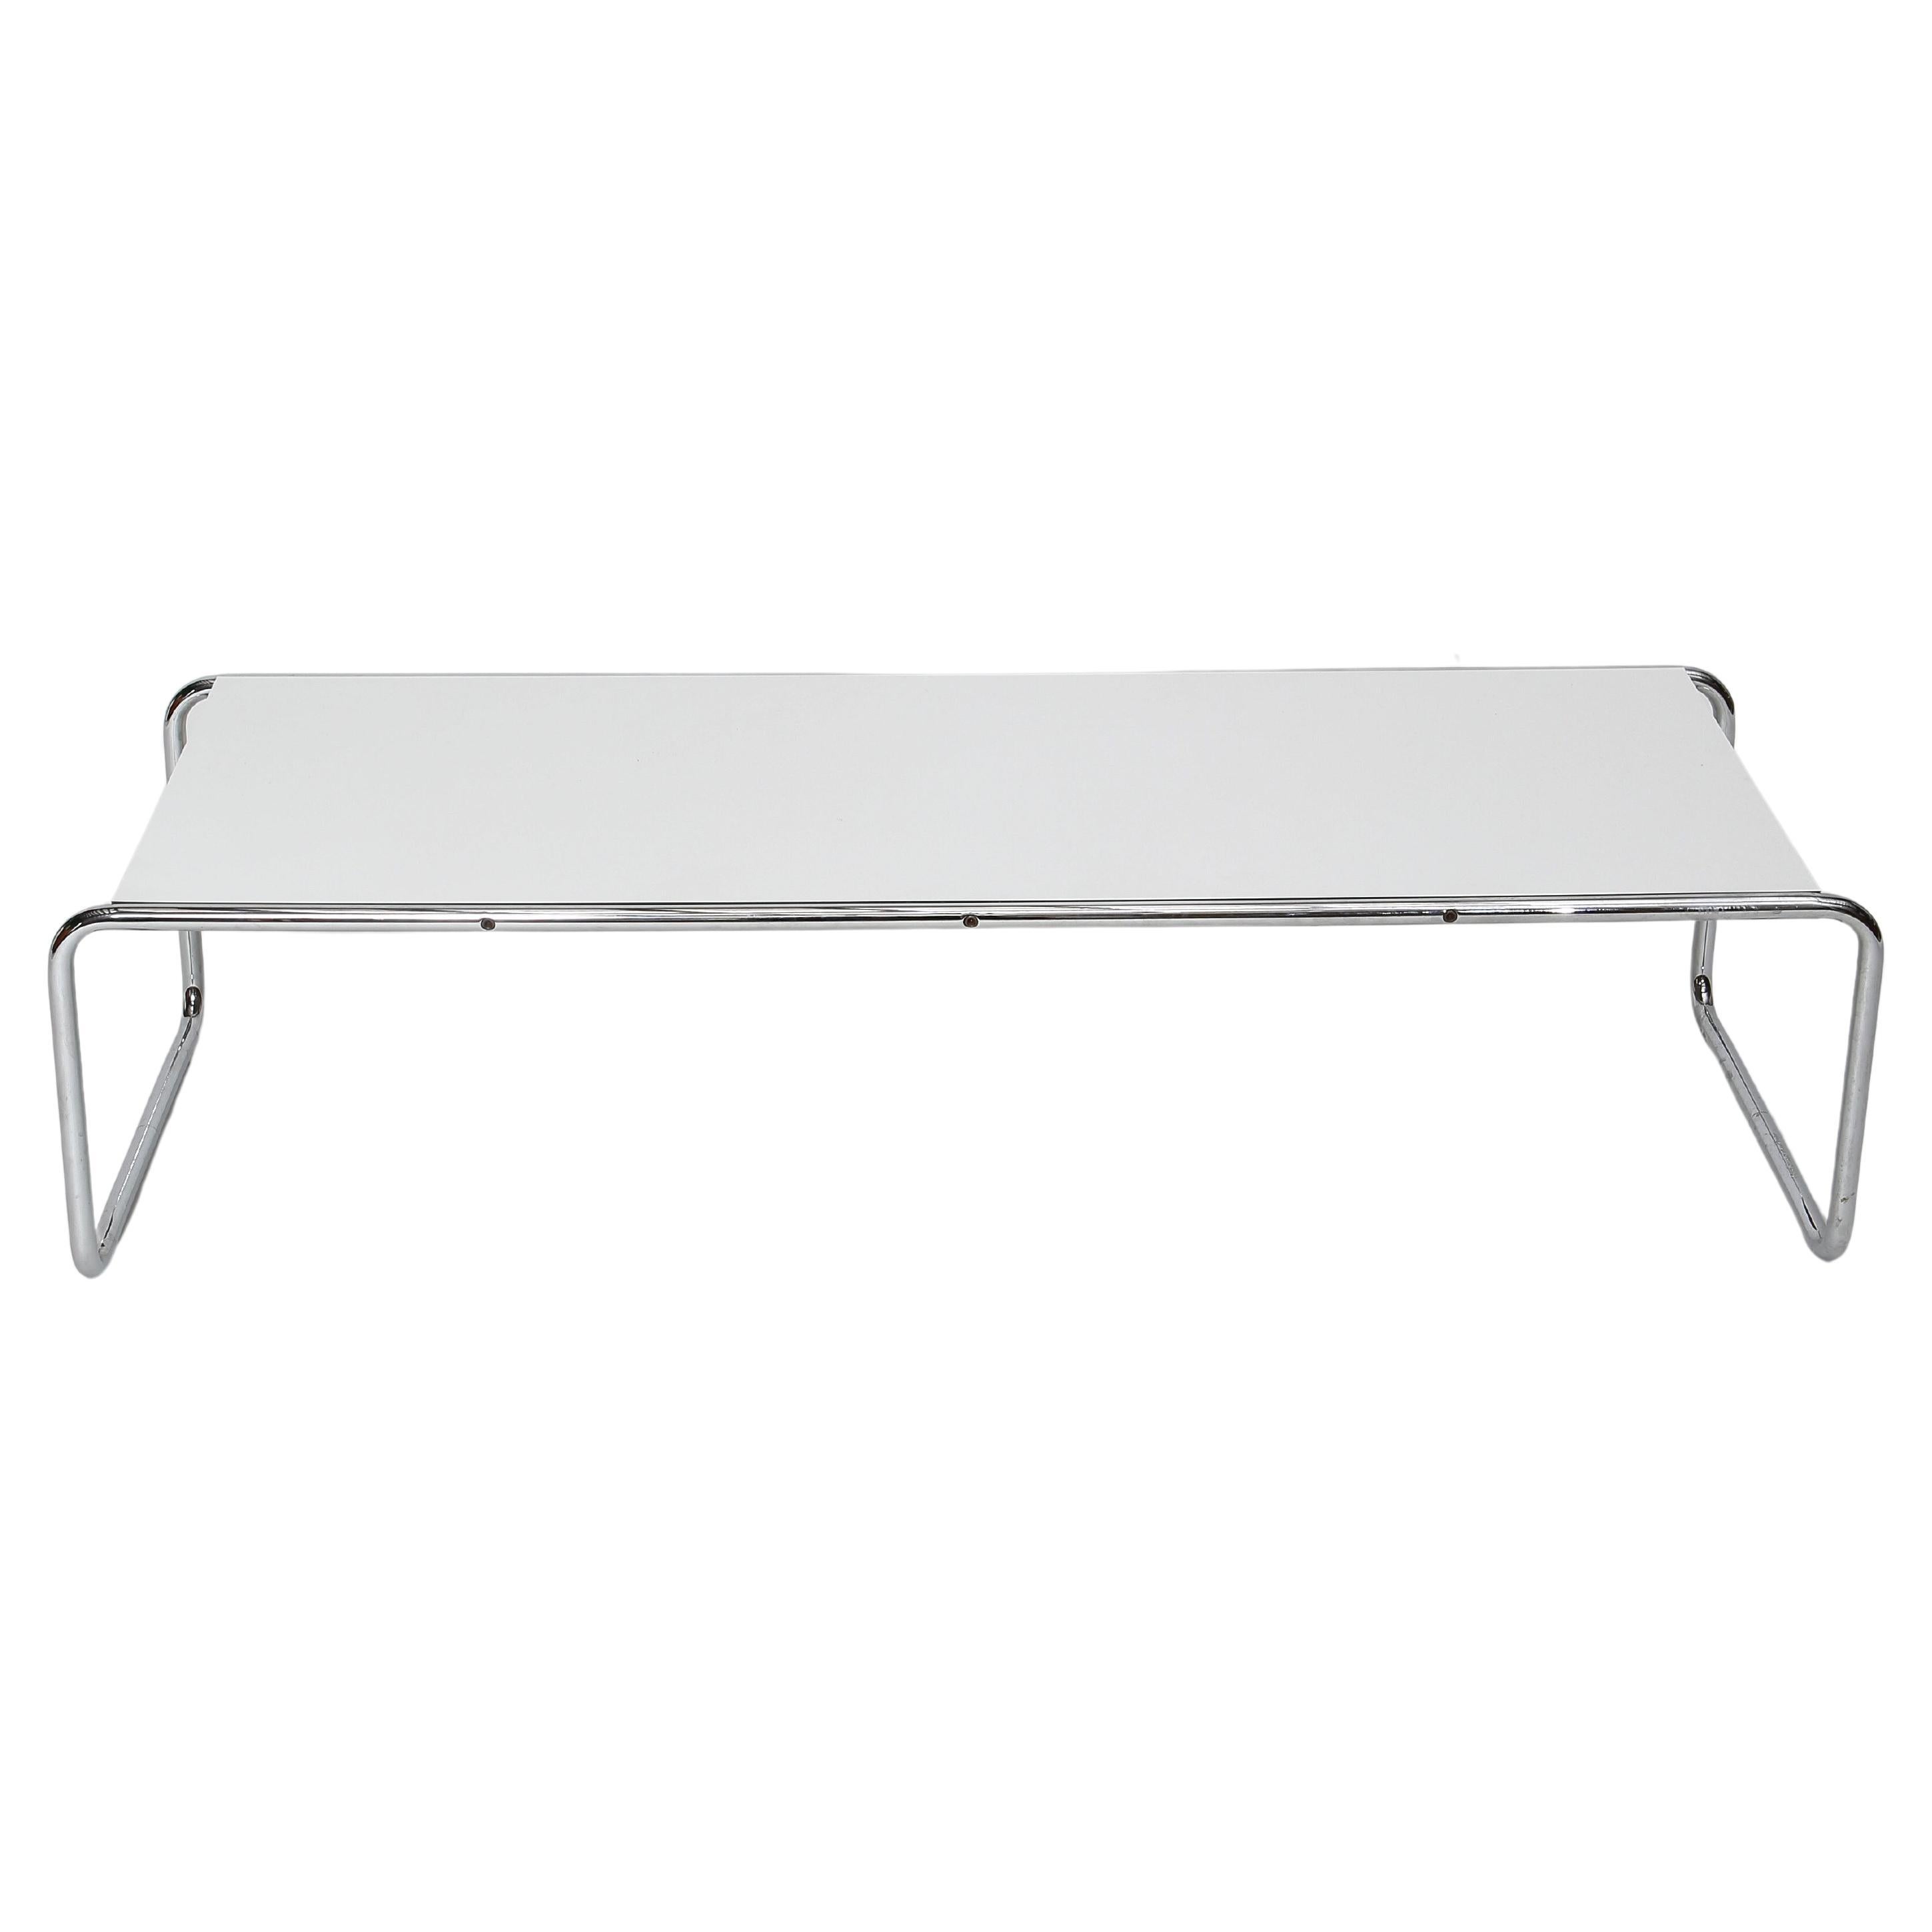 “Laccio” Coffee Table by Marcel Breuer for Knoll